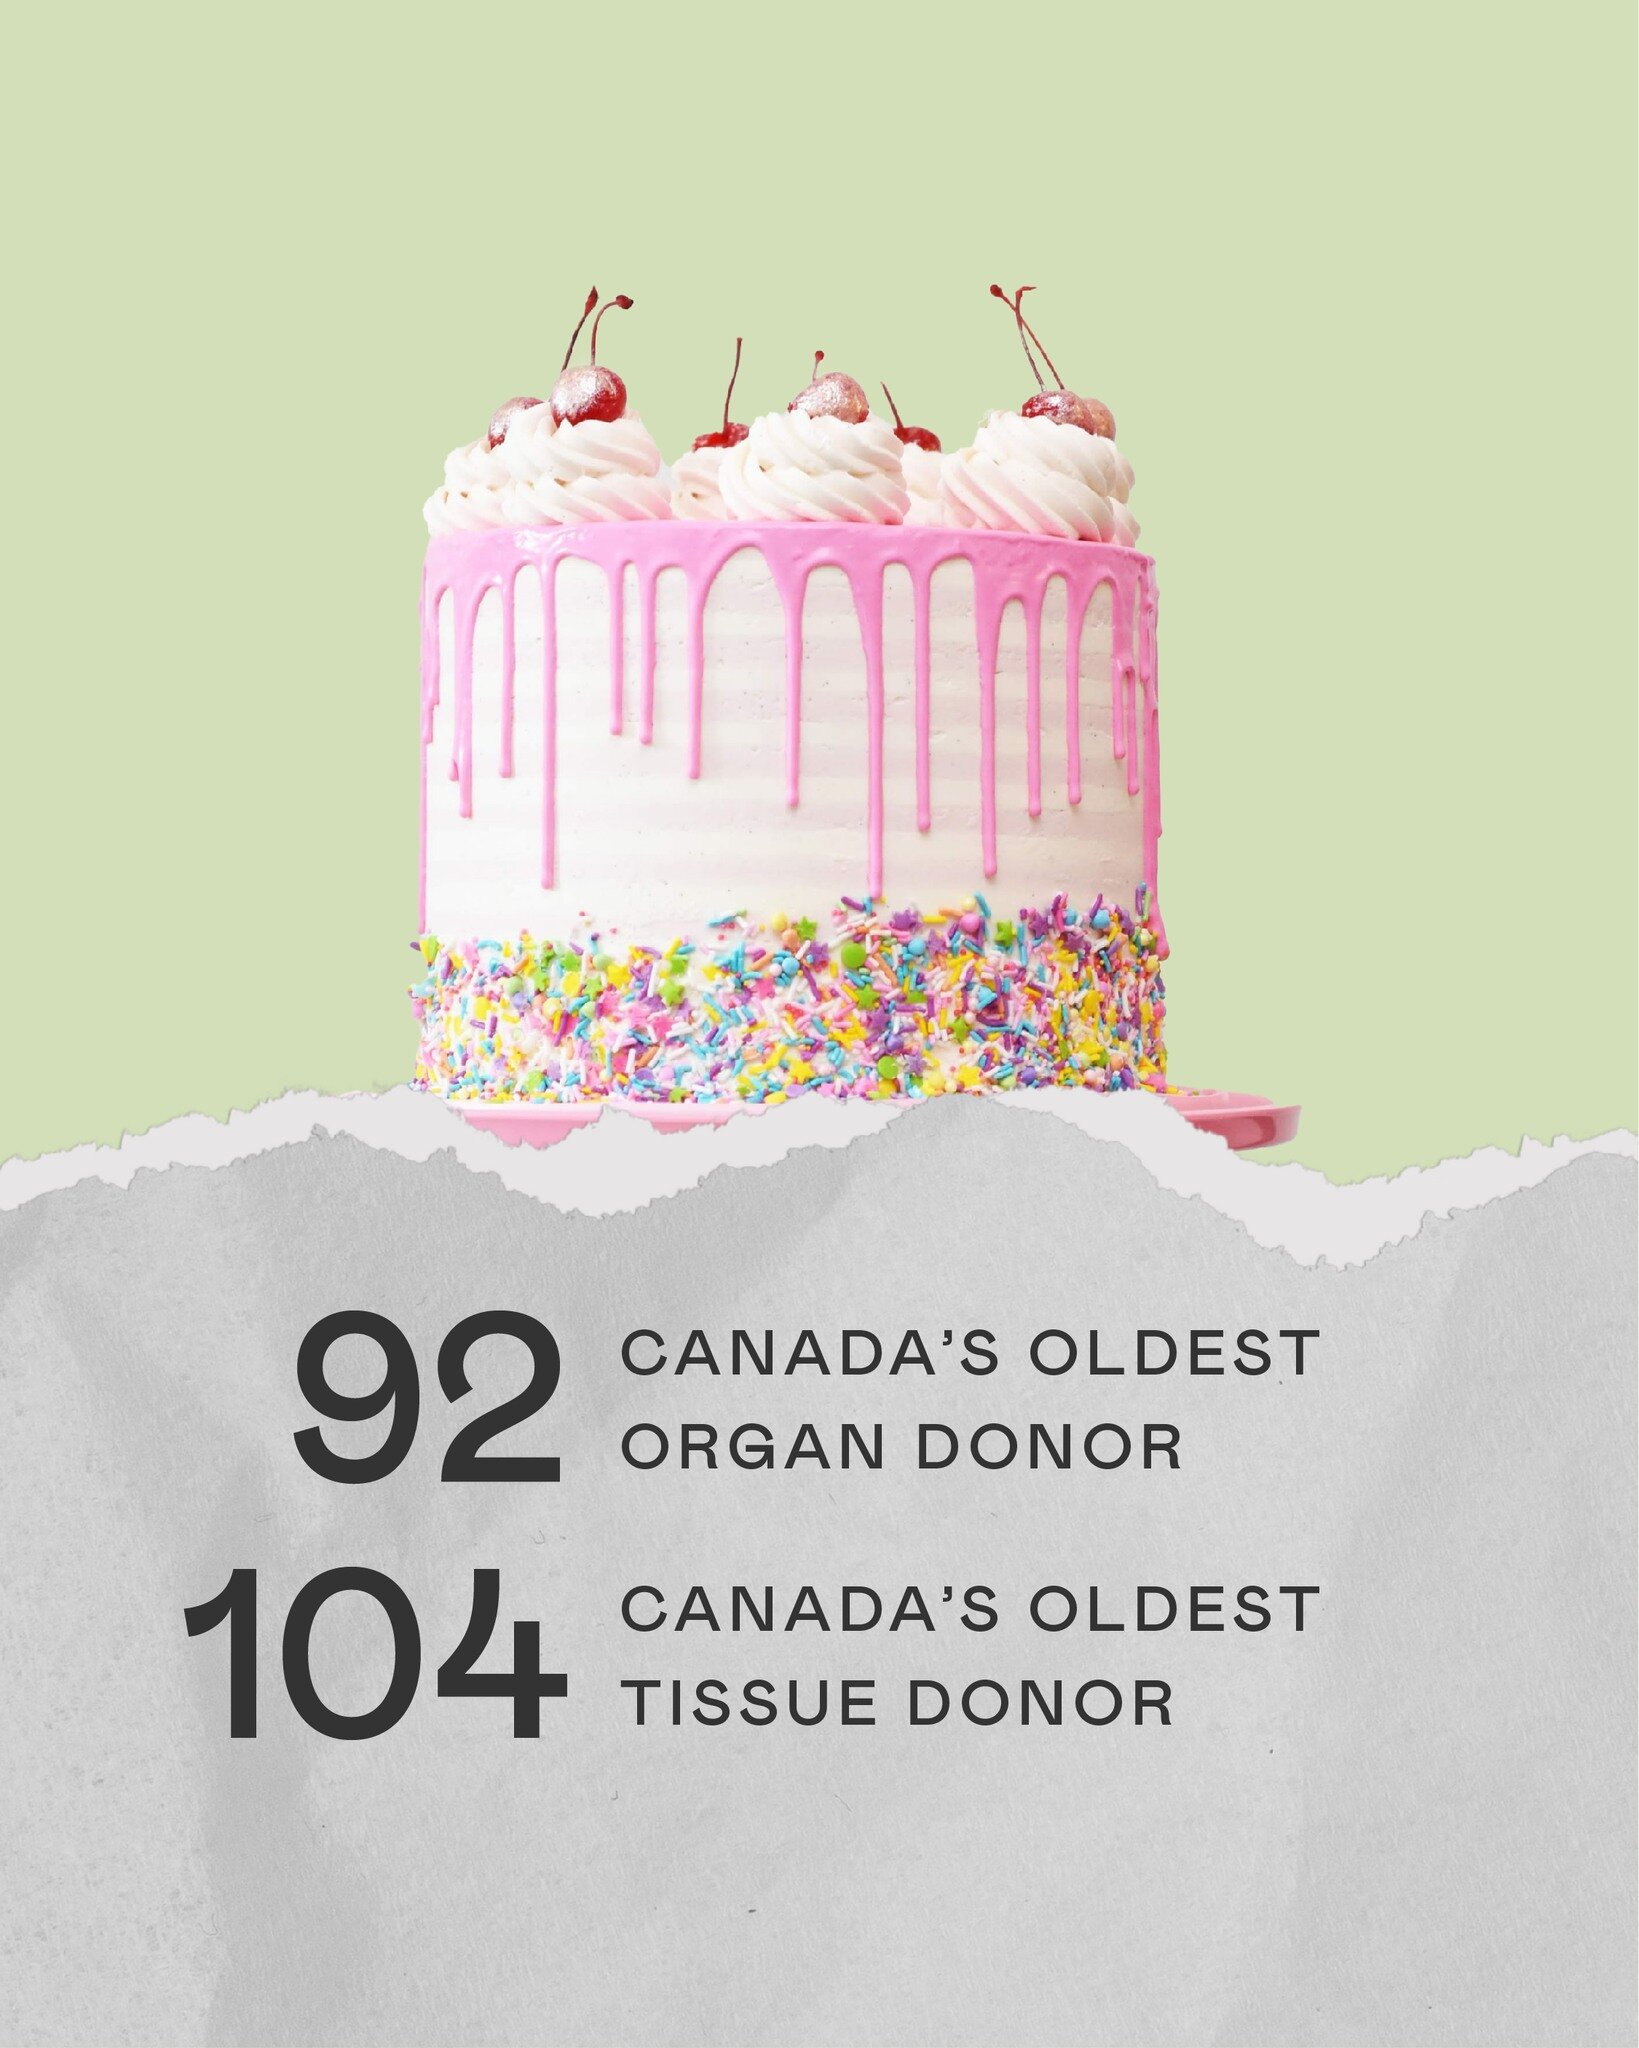 You&rsquo;re never too old to save a life. Period.

Choose to leave well so others can live well.

donateyourorgans.ca

#donateyourorgans #leavewell #livewell #organdonation